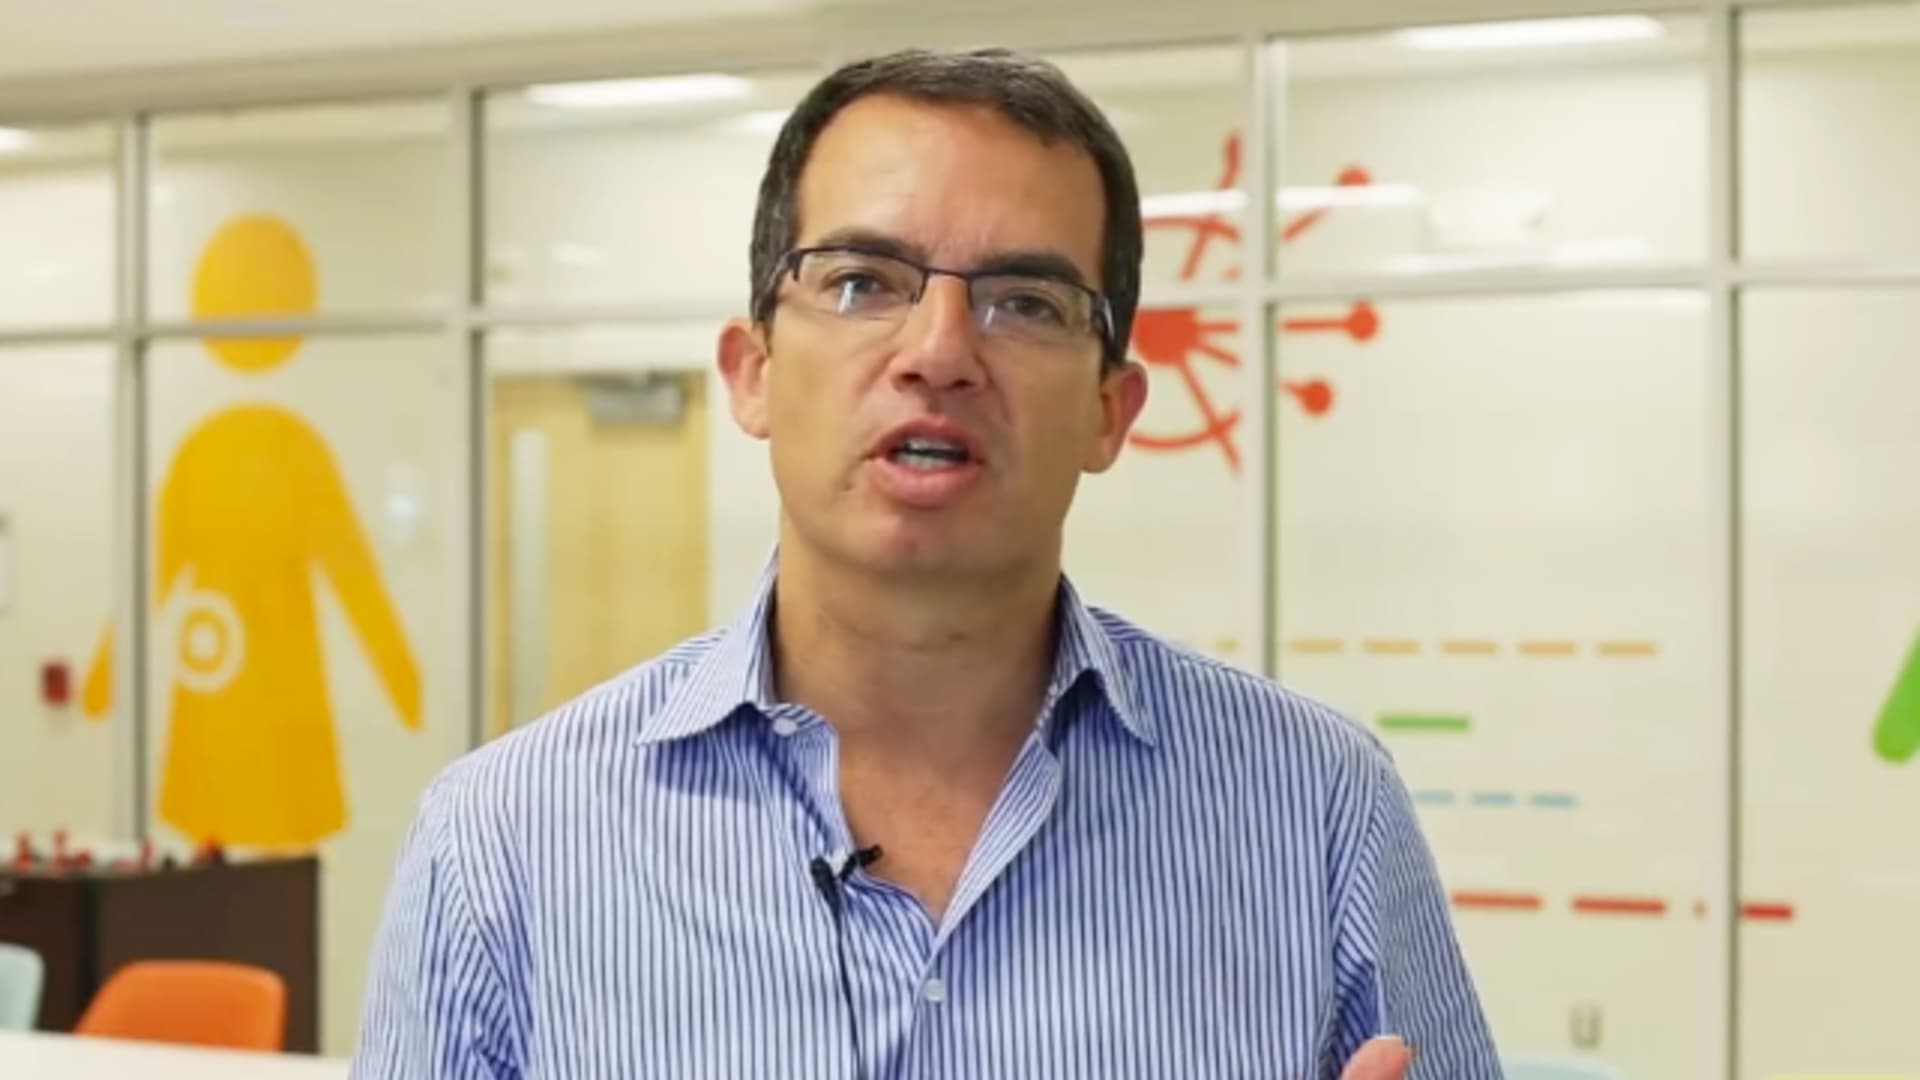 An image of Stéphane Bancel of Moderna Therapeutics from a company video.